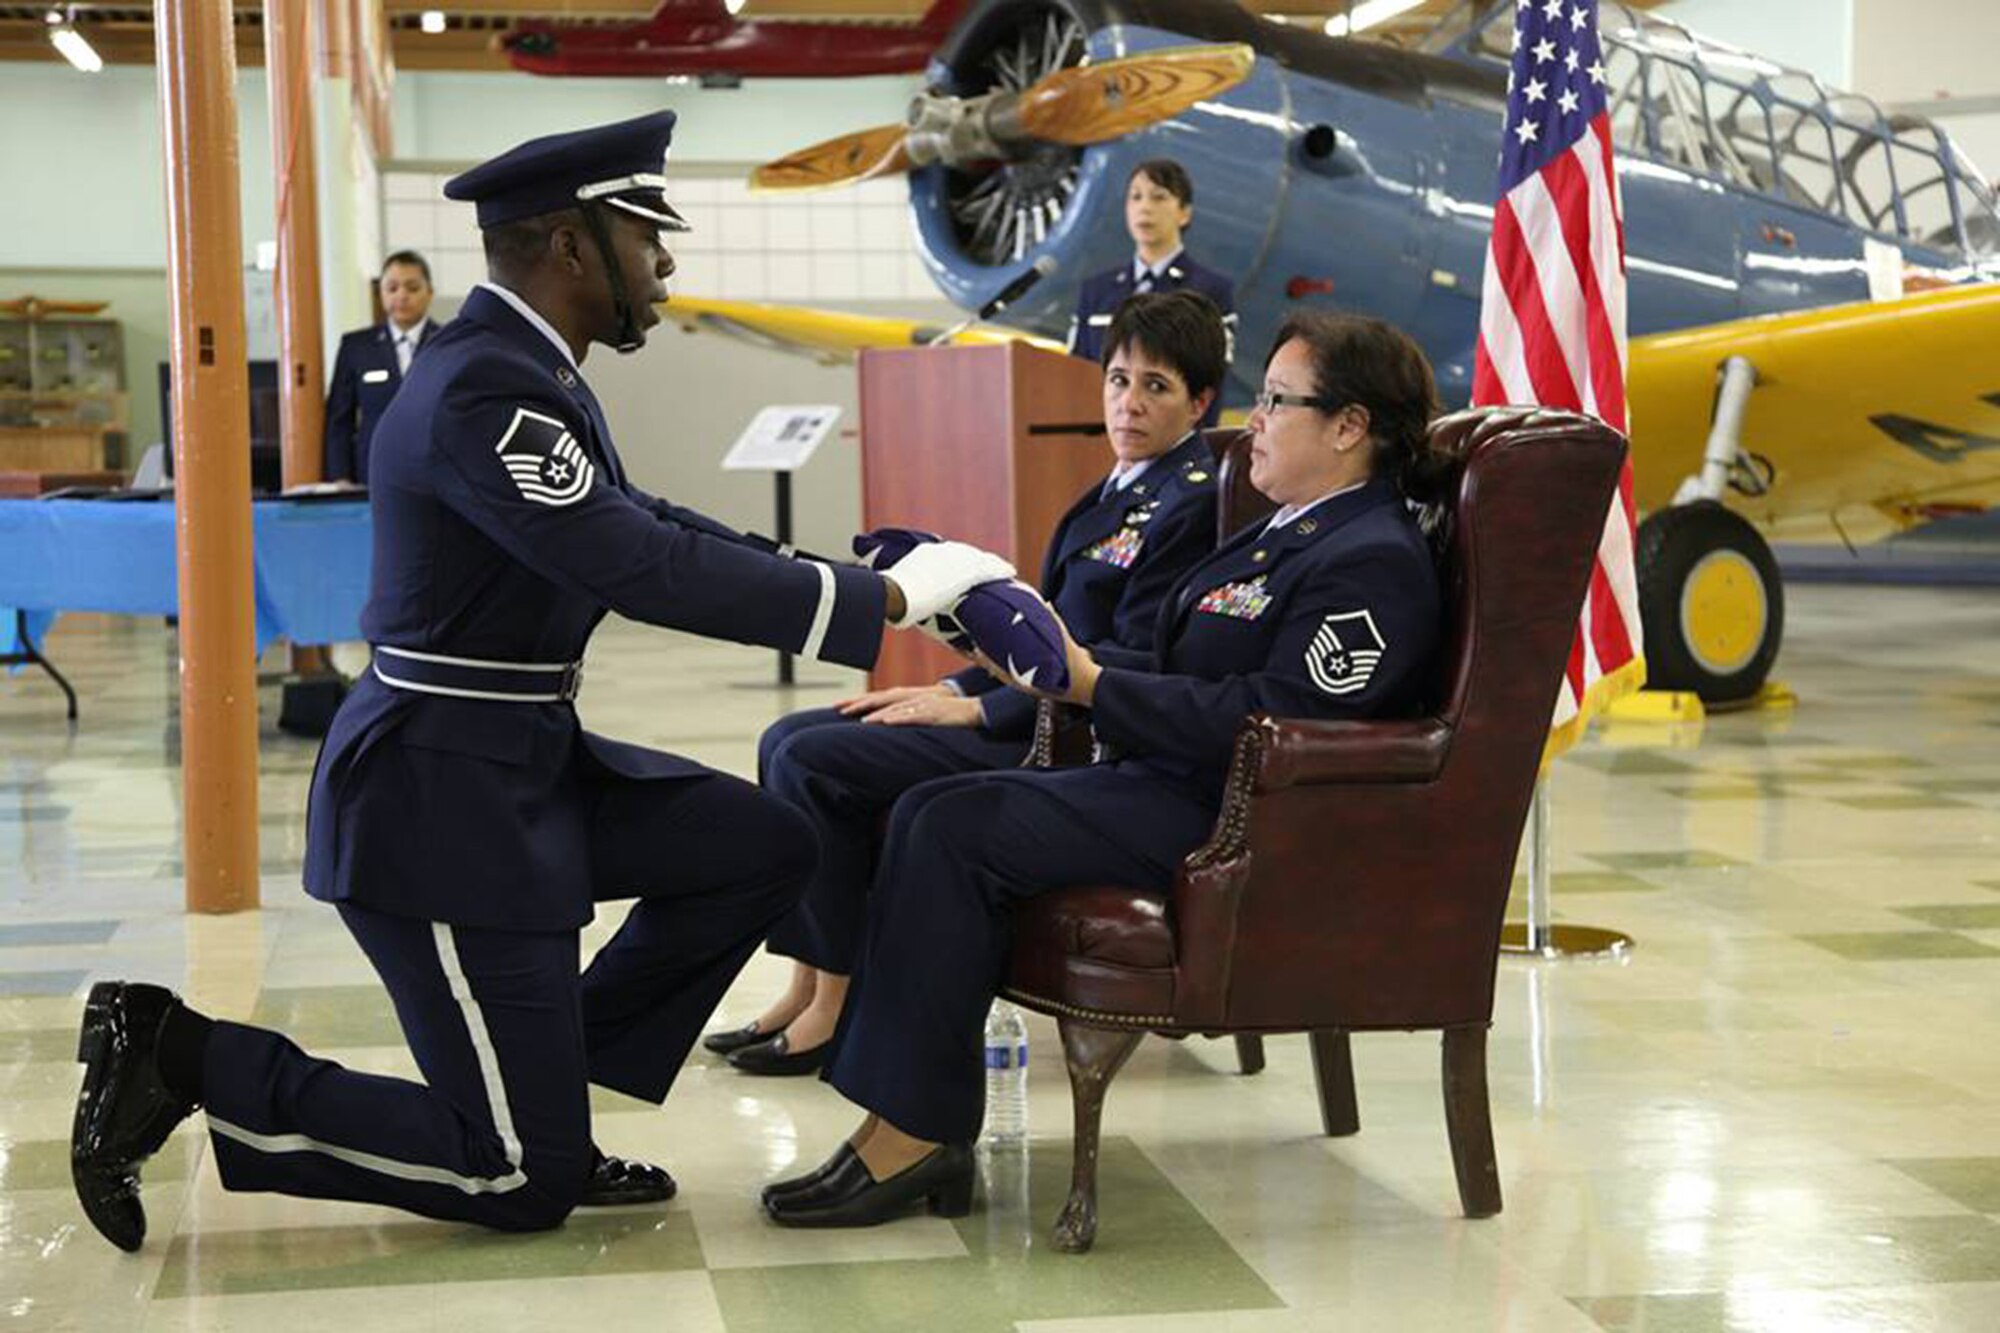 TRAVIS AIR FORCE BASE, Calif. -- Culminating 33 years of uniformed service, Master Sgt. Bridgette J. Dobson, 349th Force Support Squadron, retired from the Air Force Reserve in a ceremony at the Travis Air Force Base Heritage Center, March 8, 2014. (U.S. Air Force photo / Lt. Col. Robert Couse-Baker) 

